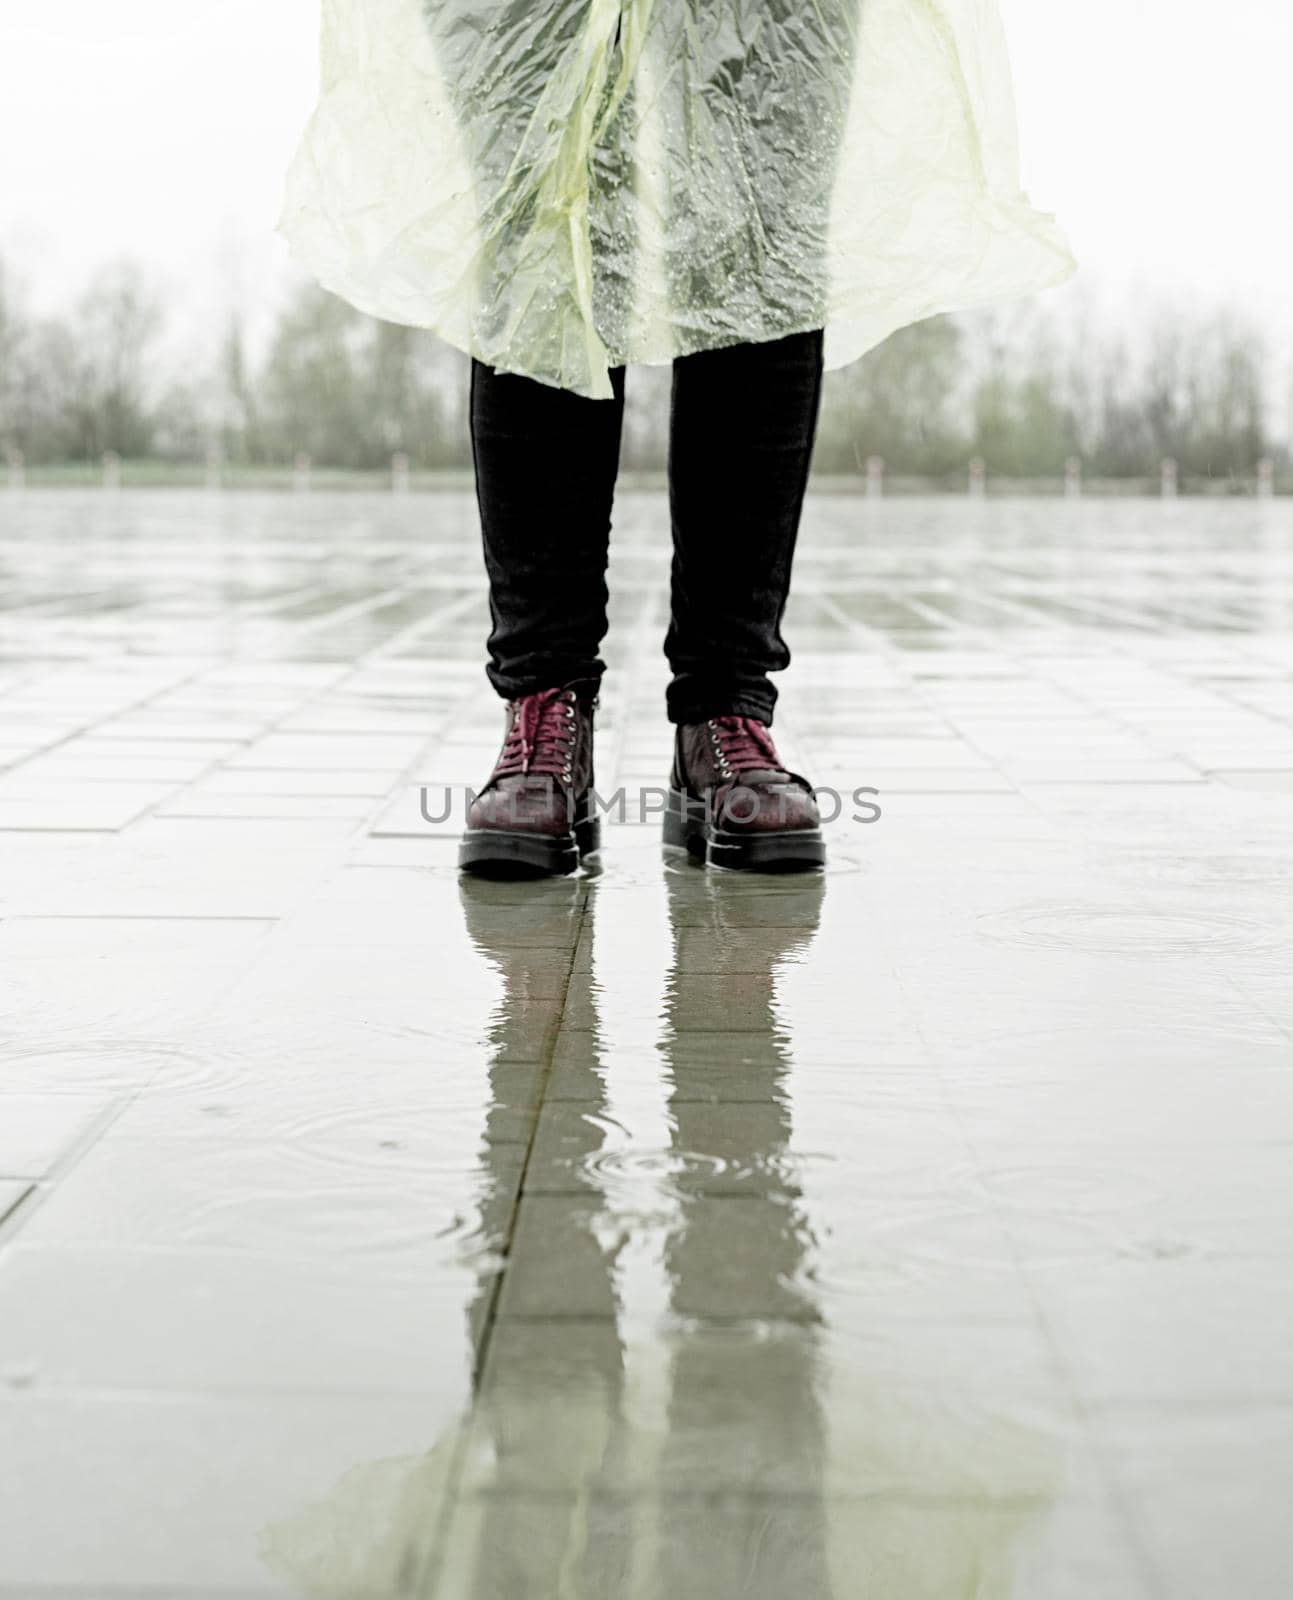 woman walking on asphalt in rainy weather. Close up of legs and shoes standing in puddles